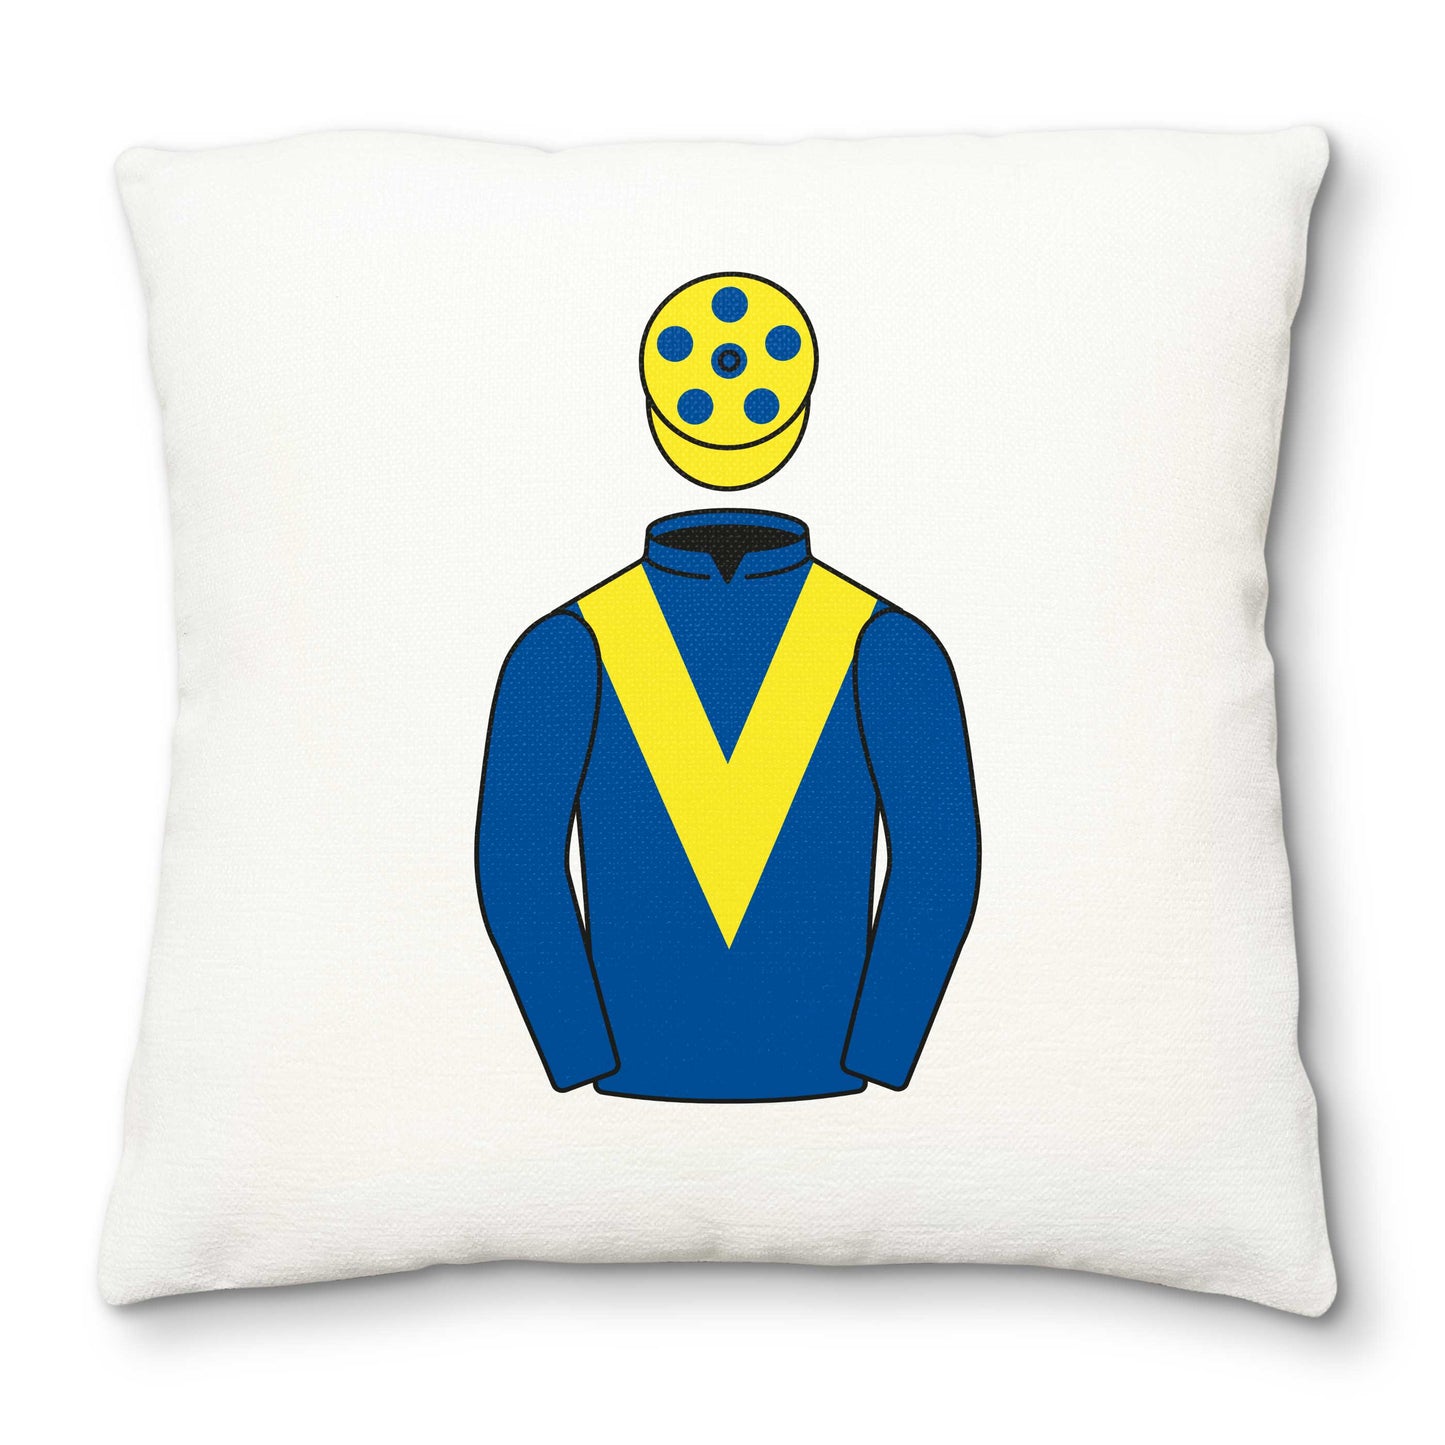 Saeed Suhail Deluxe Cushion Cover - Hacked Up